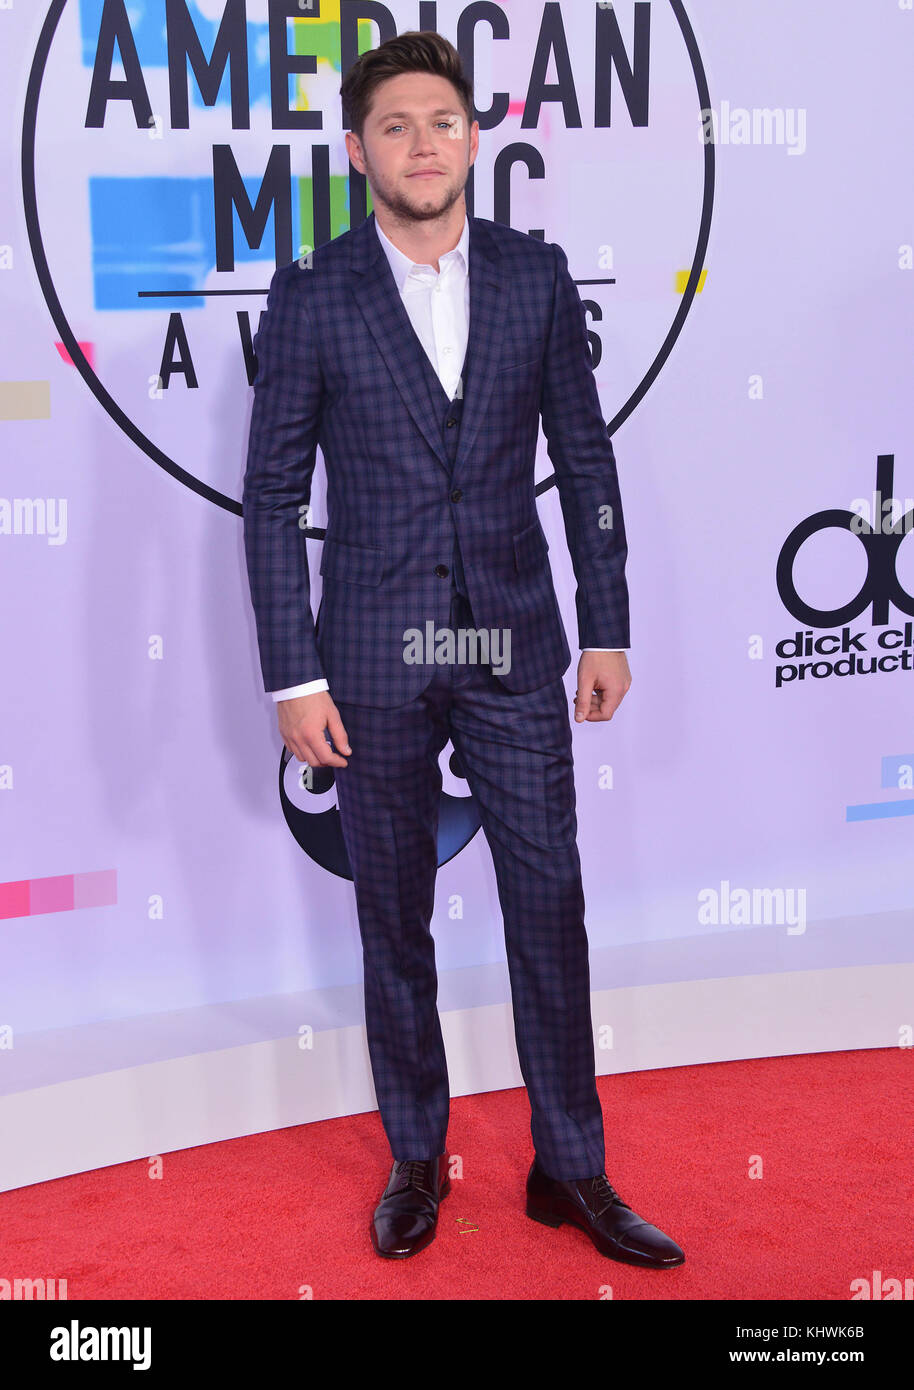 Los Angeles, USA. 19th Nov, 2017. Niall Horan 230 arrives at the 2017 American Music Awards at Microsoft Theater on November 19, 2017 in Los Angeles, California Credit: Tsuni/USA/Alamy Live News Stock Photo